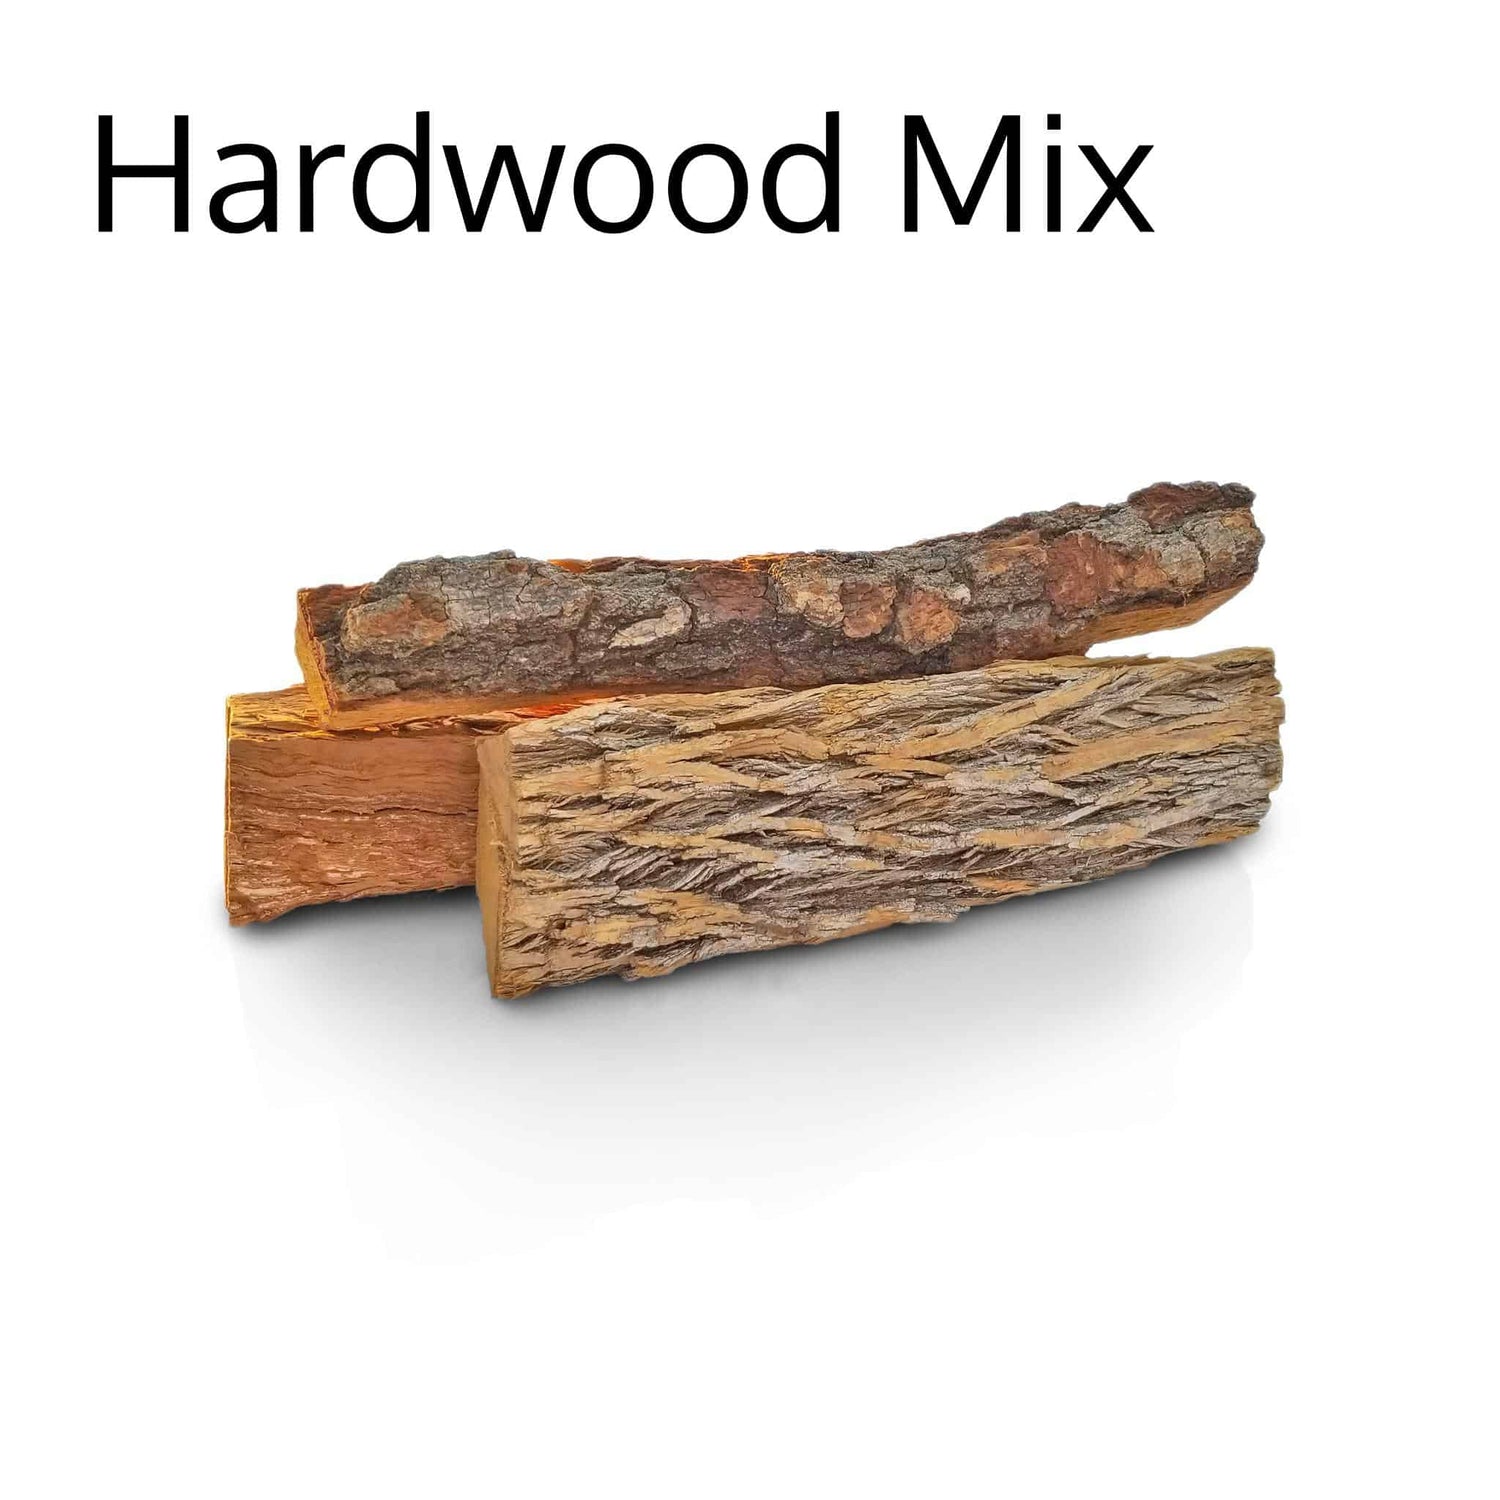 Top quality hardwood firewood mix, seasoned, very low and guaranteed moisture, local free delivery, carbon-neutral and from sustainable sources.